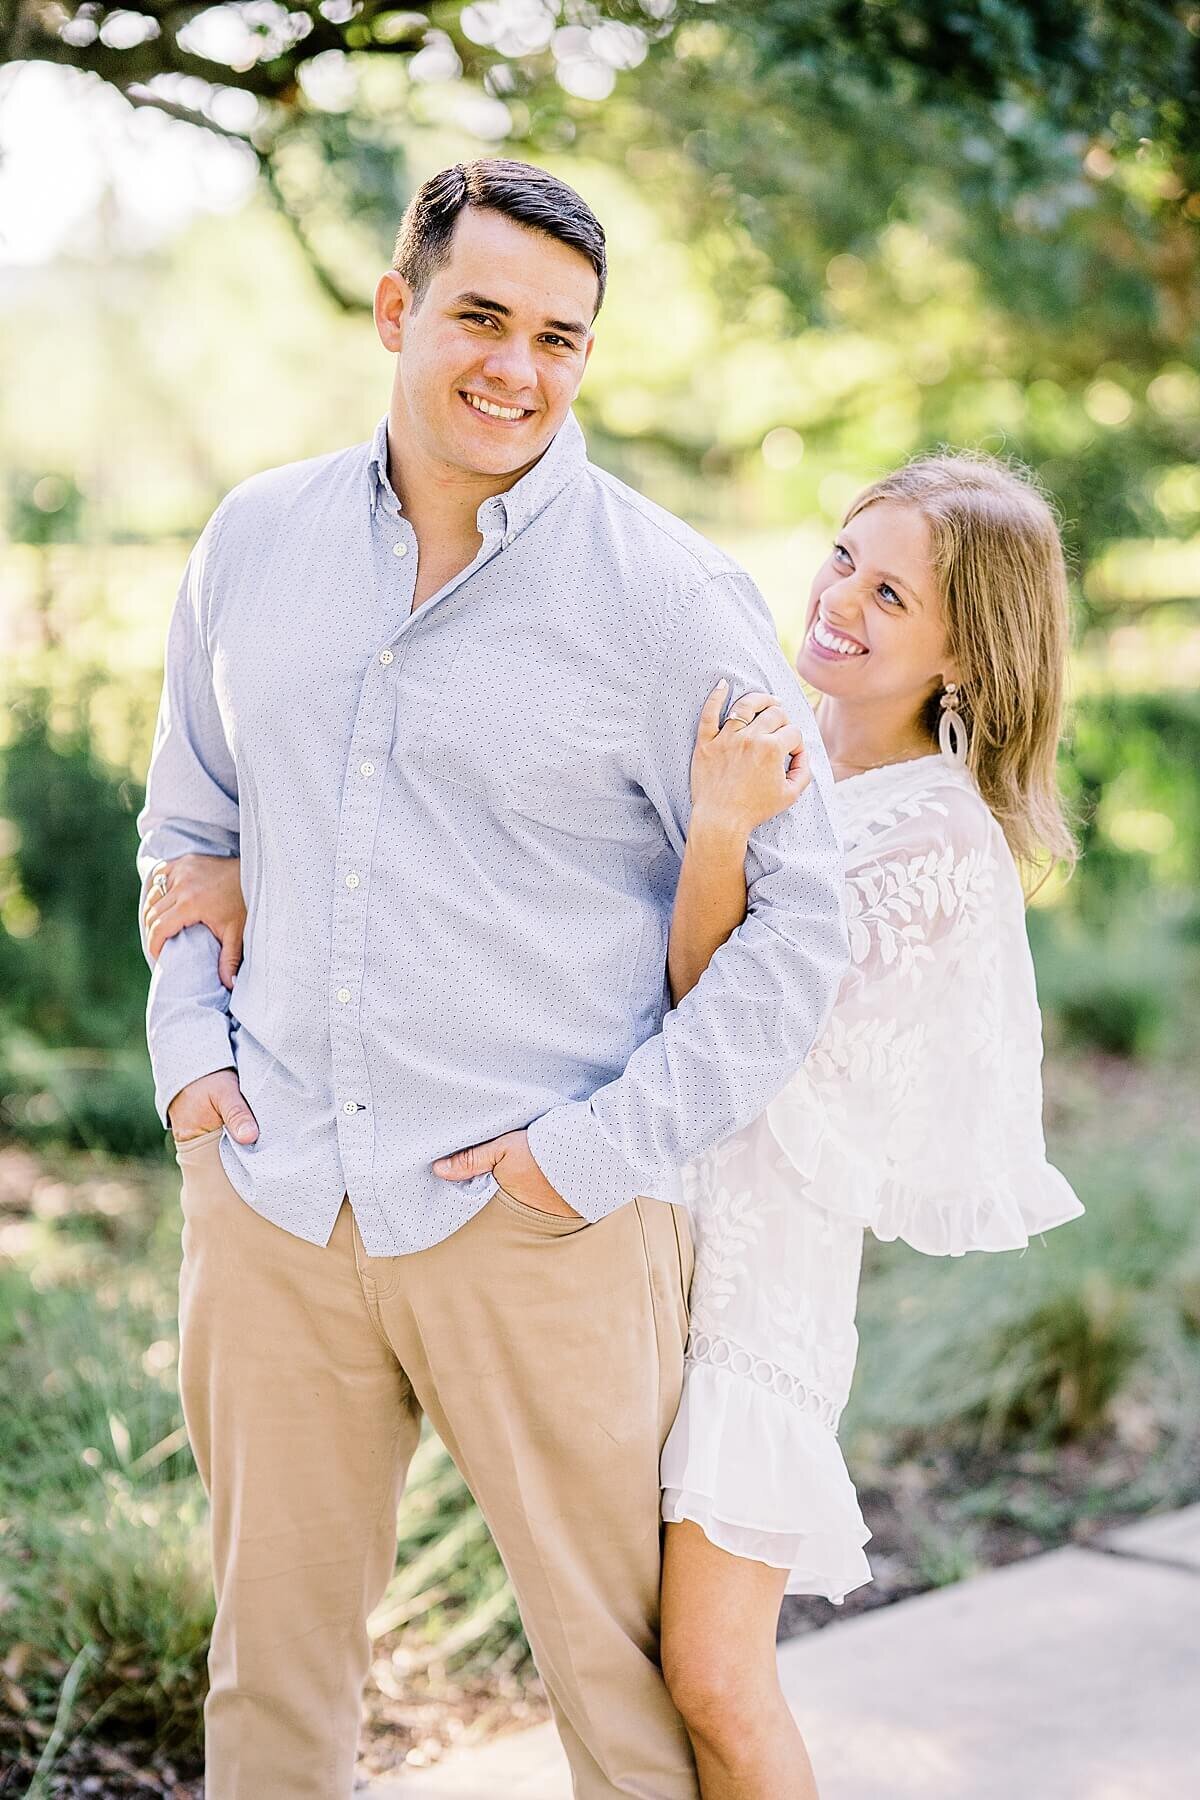 McGovern-Centennial-Gardens-Hermann-Park-Engagement-Session-Alicia-Yarrish-Photography_0034